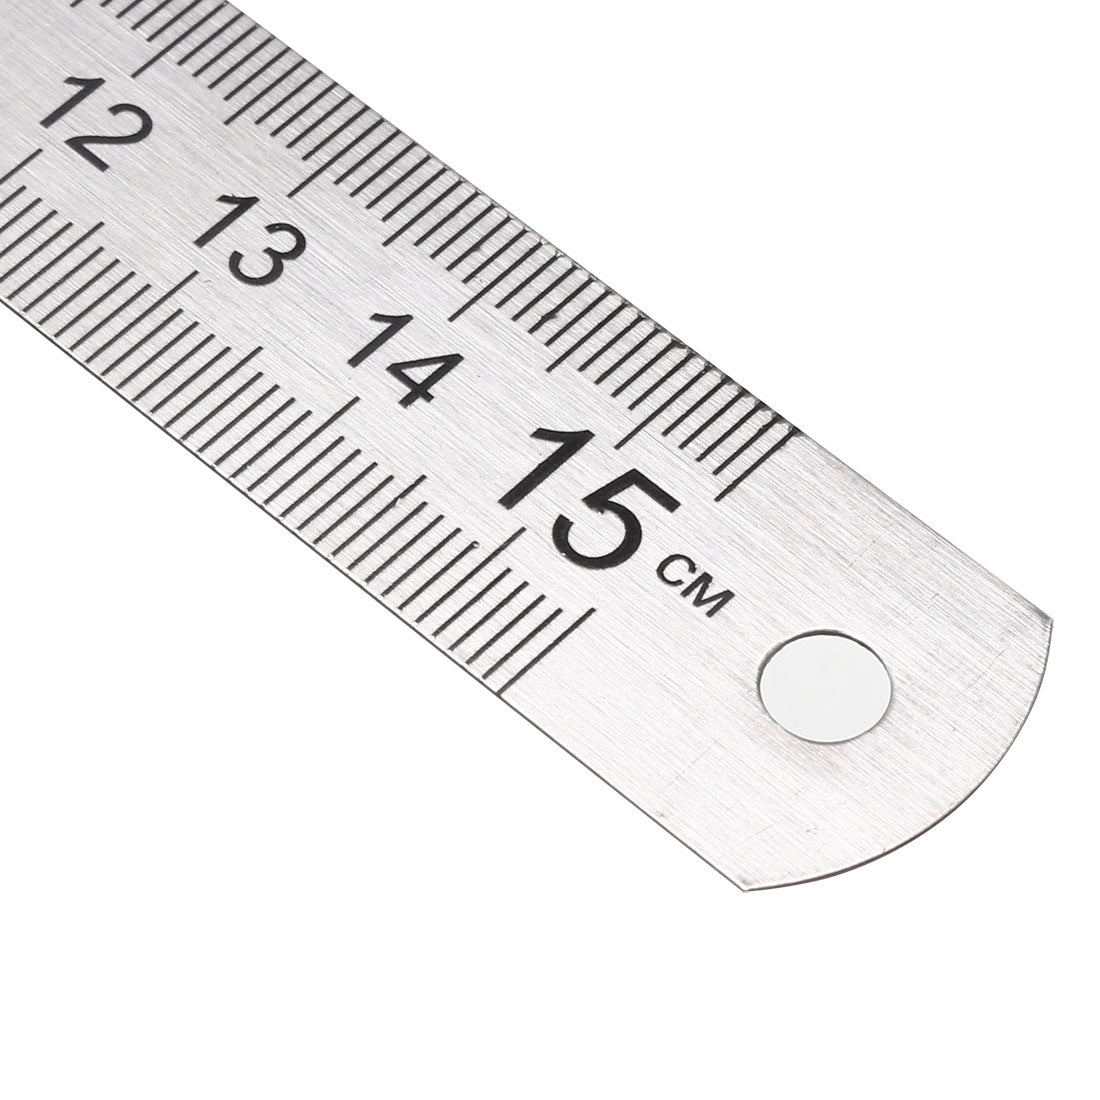 uxcell Uxcell Stainless Steel Ruler 6-inch (15cm) Straight Ruler Inches and Metric Scale 6pcs